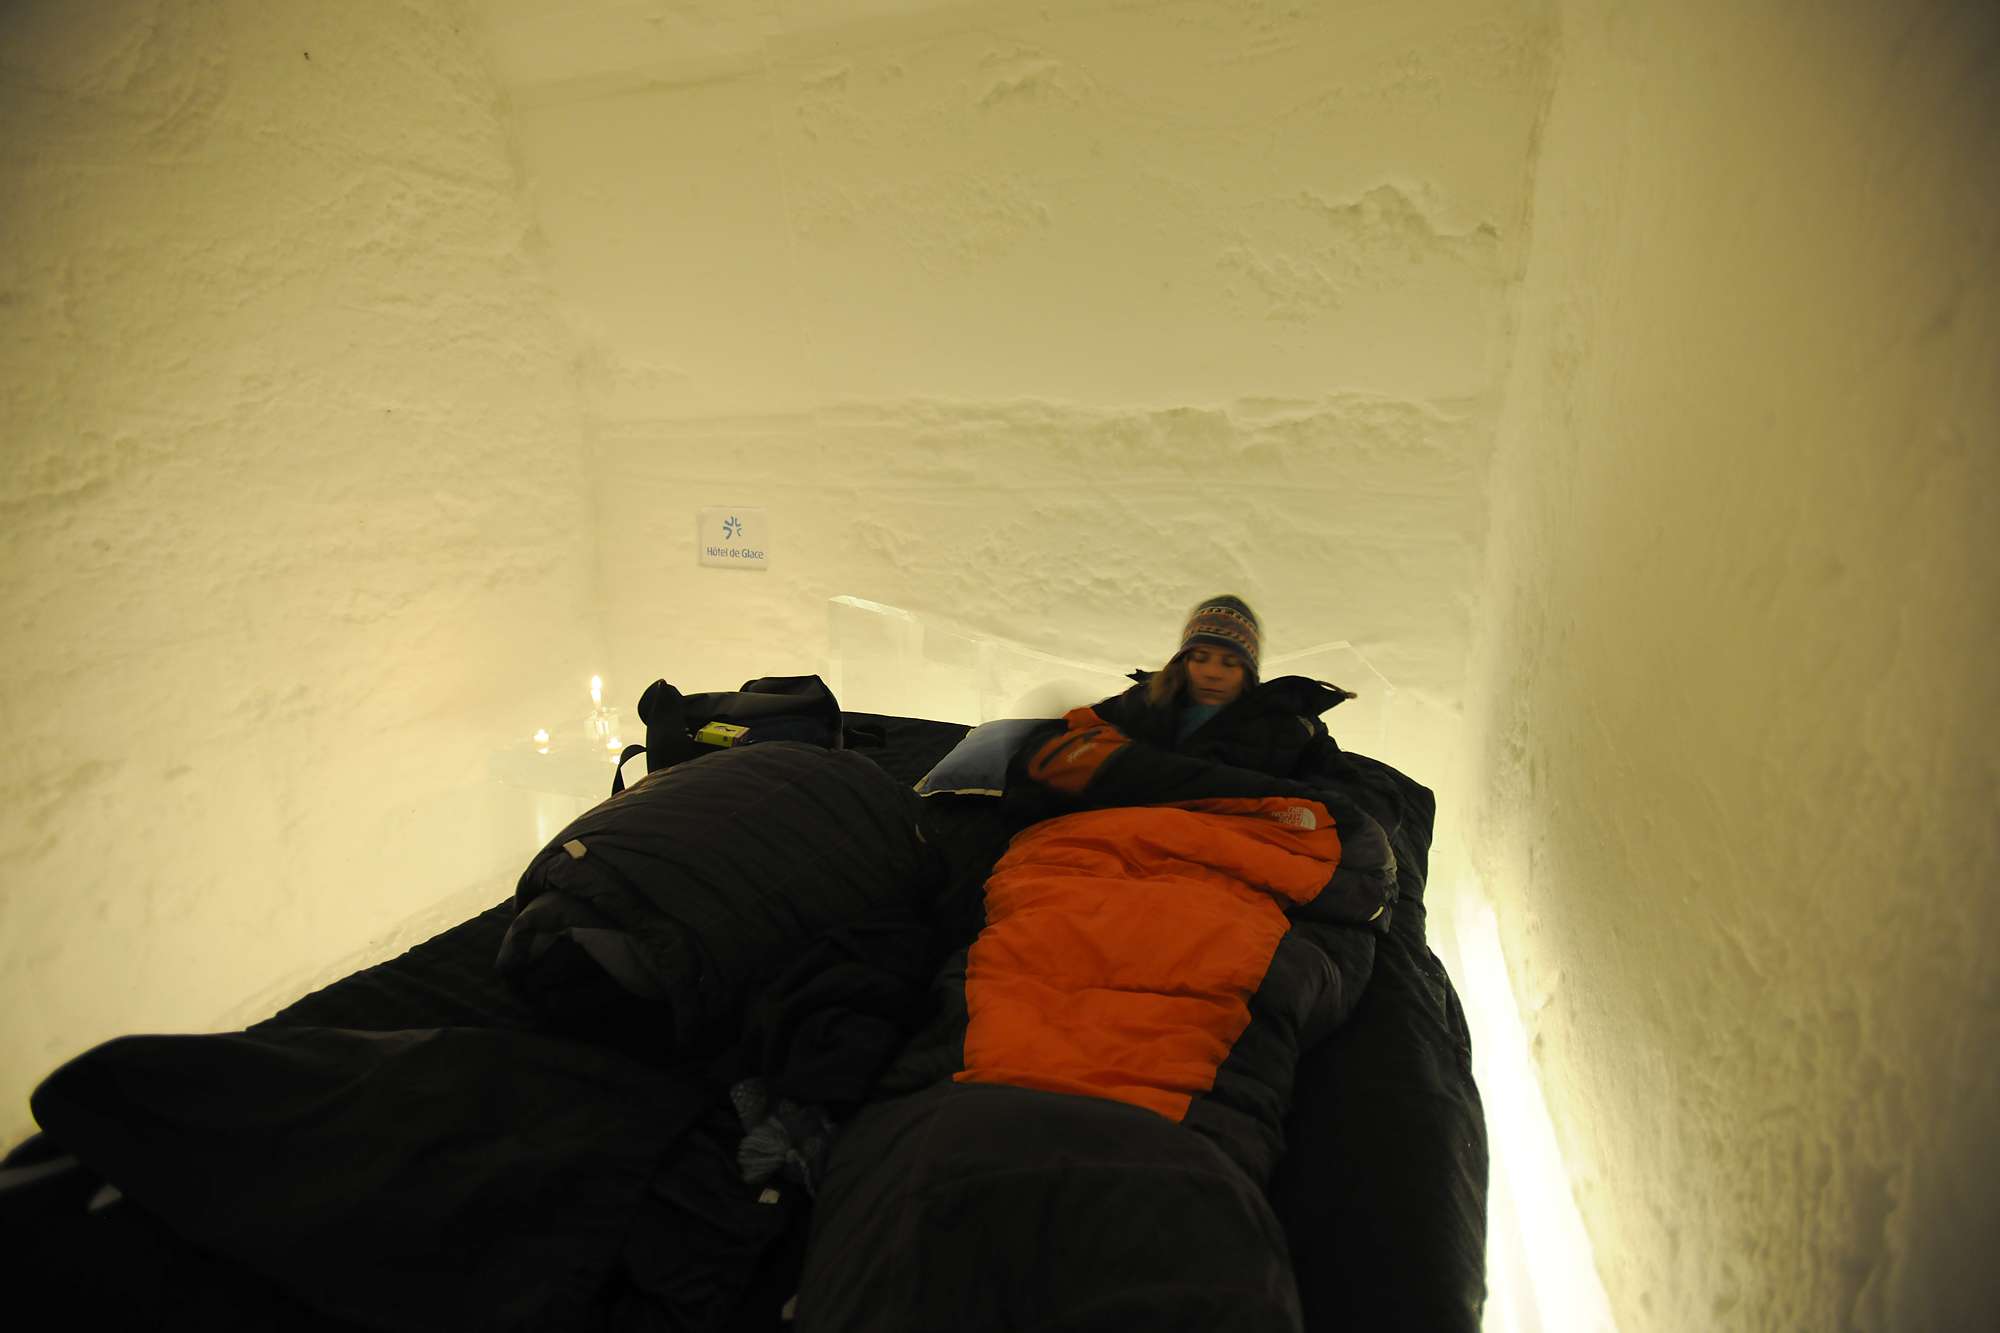 Ready for bed, Ice Hotel, Quebec City